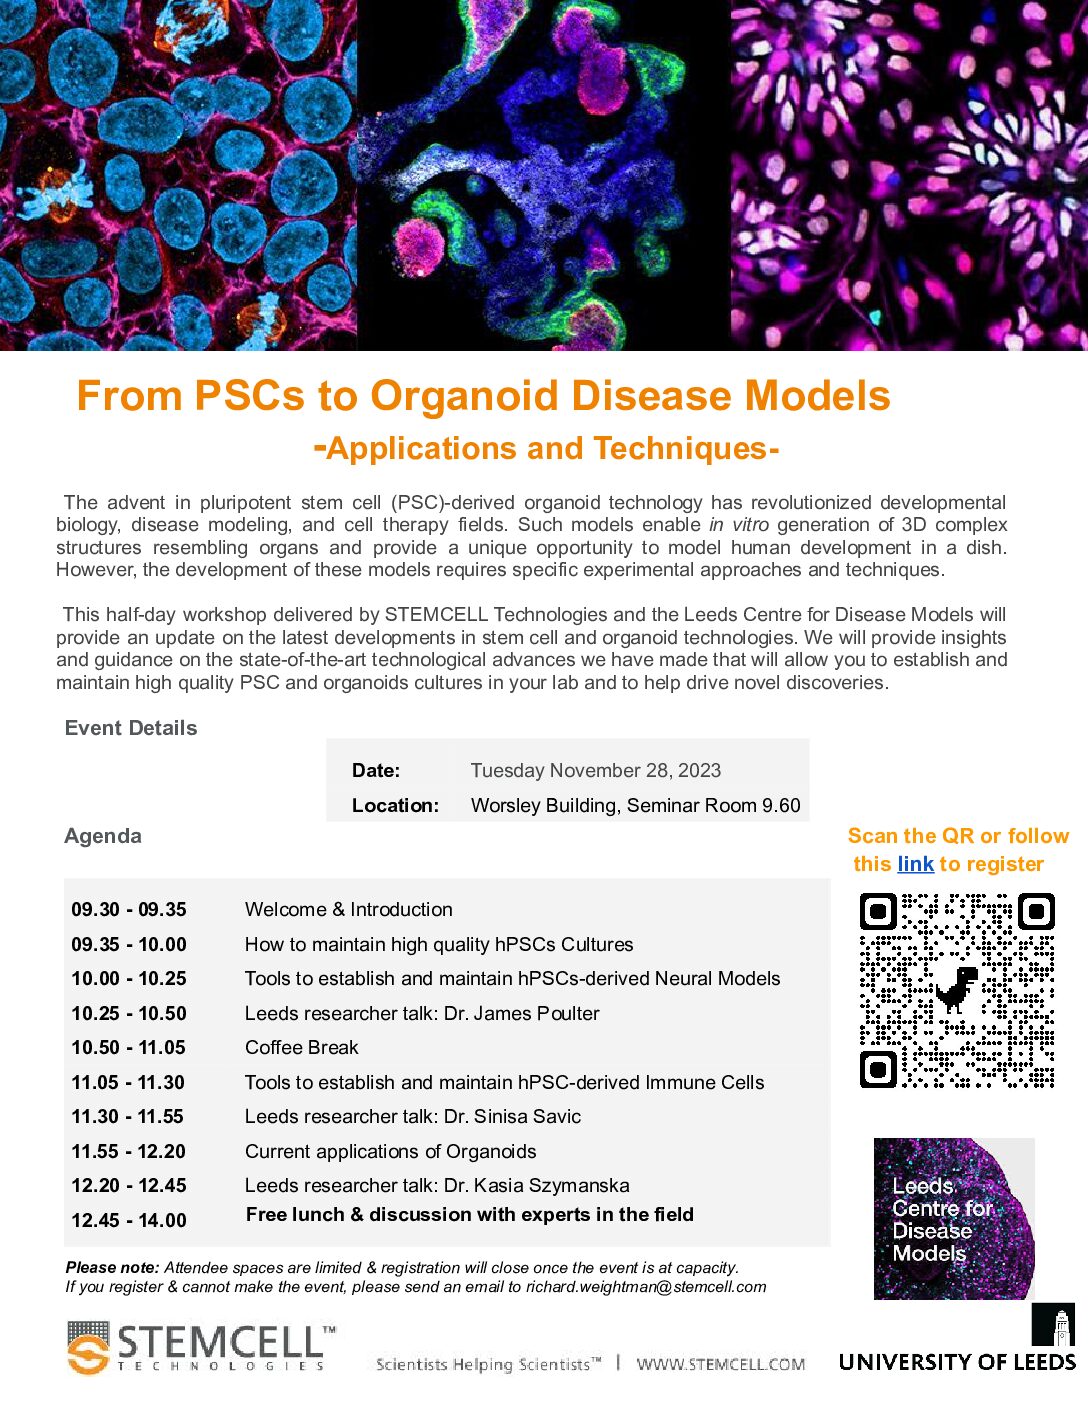 From PSCs to Organoid Disease Models